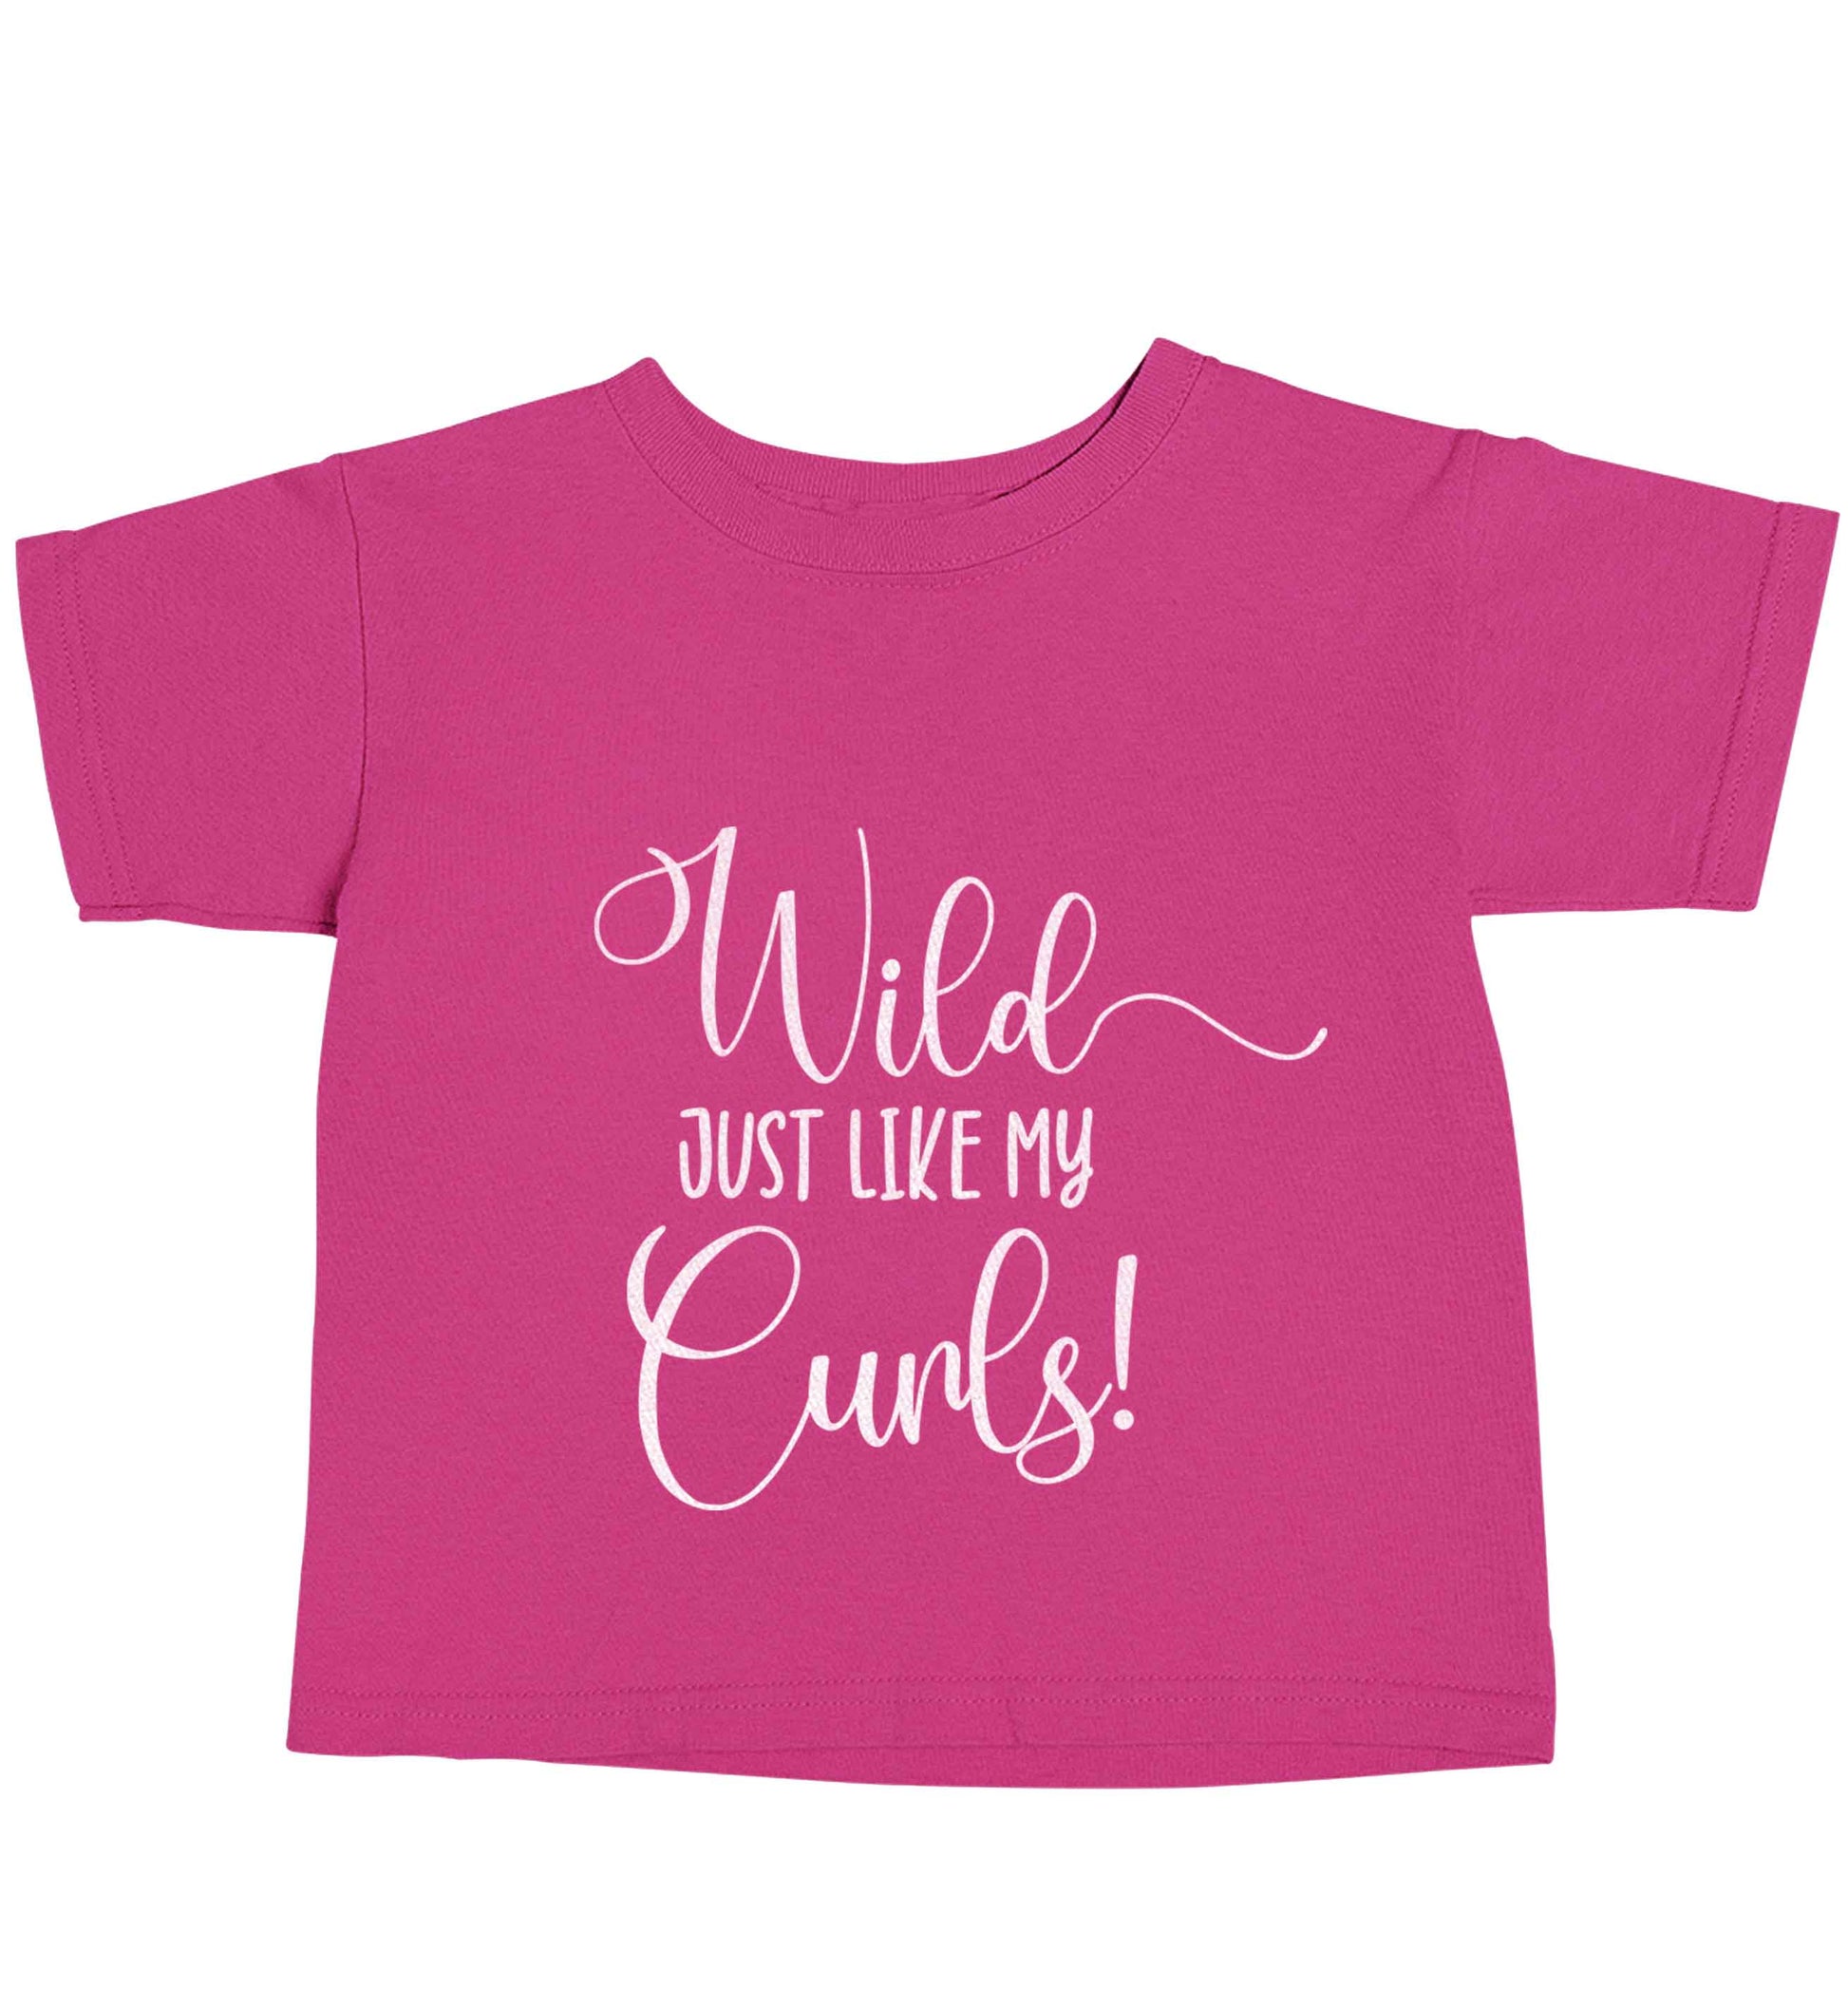 Wild just like my curls pink baby toddler Tshirt 2 Years